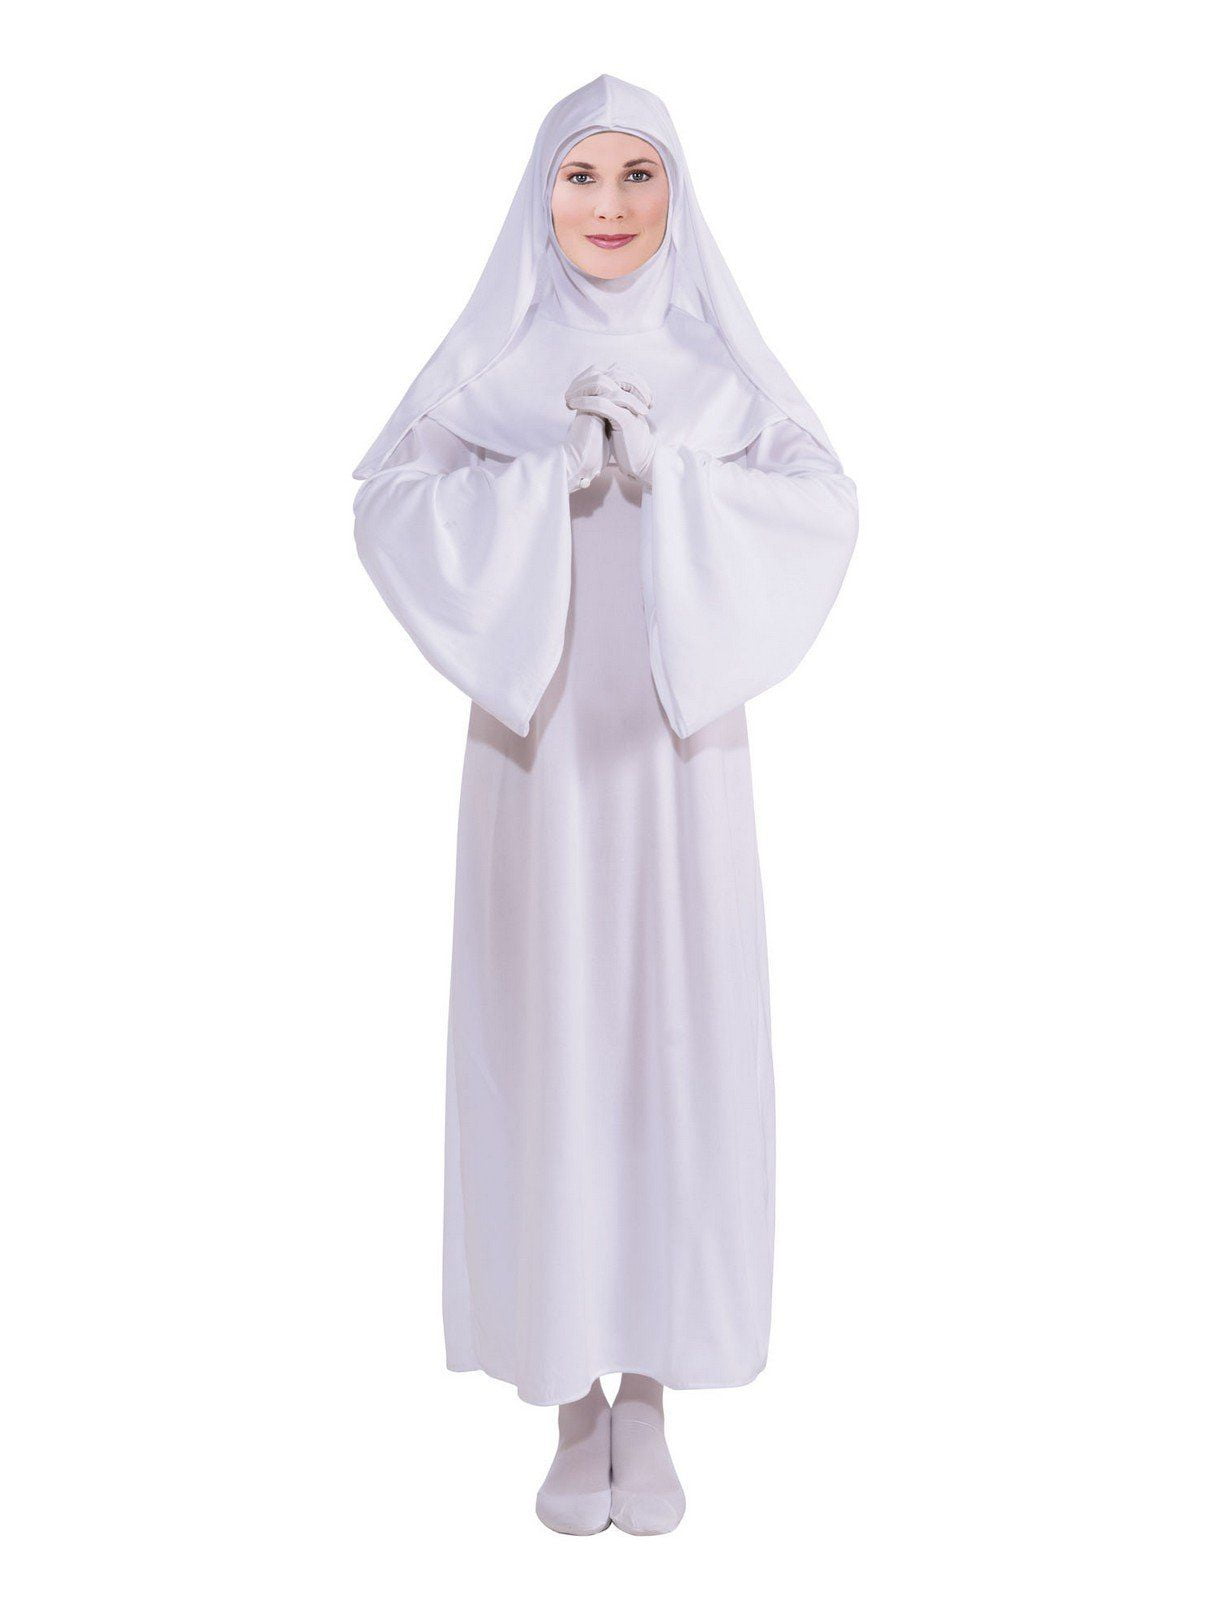 Halloween Ladies Nun Costume White Nuns Outfit Fancy Dress Relgious Figure Ghost